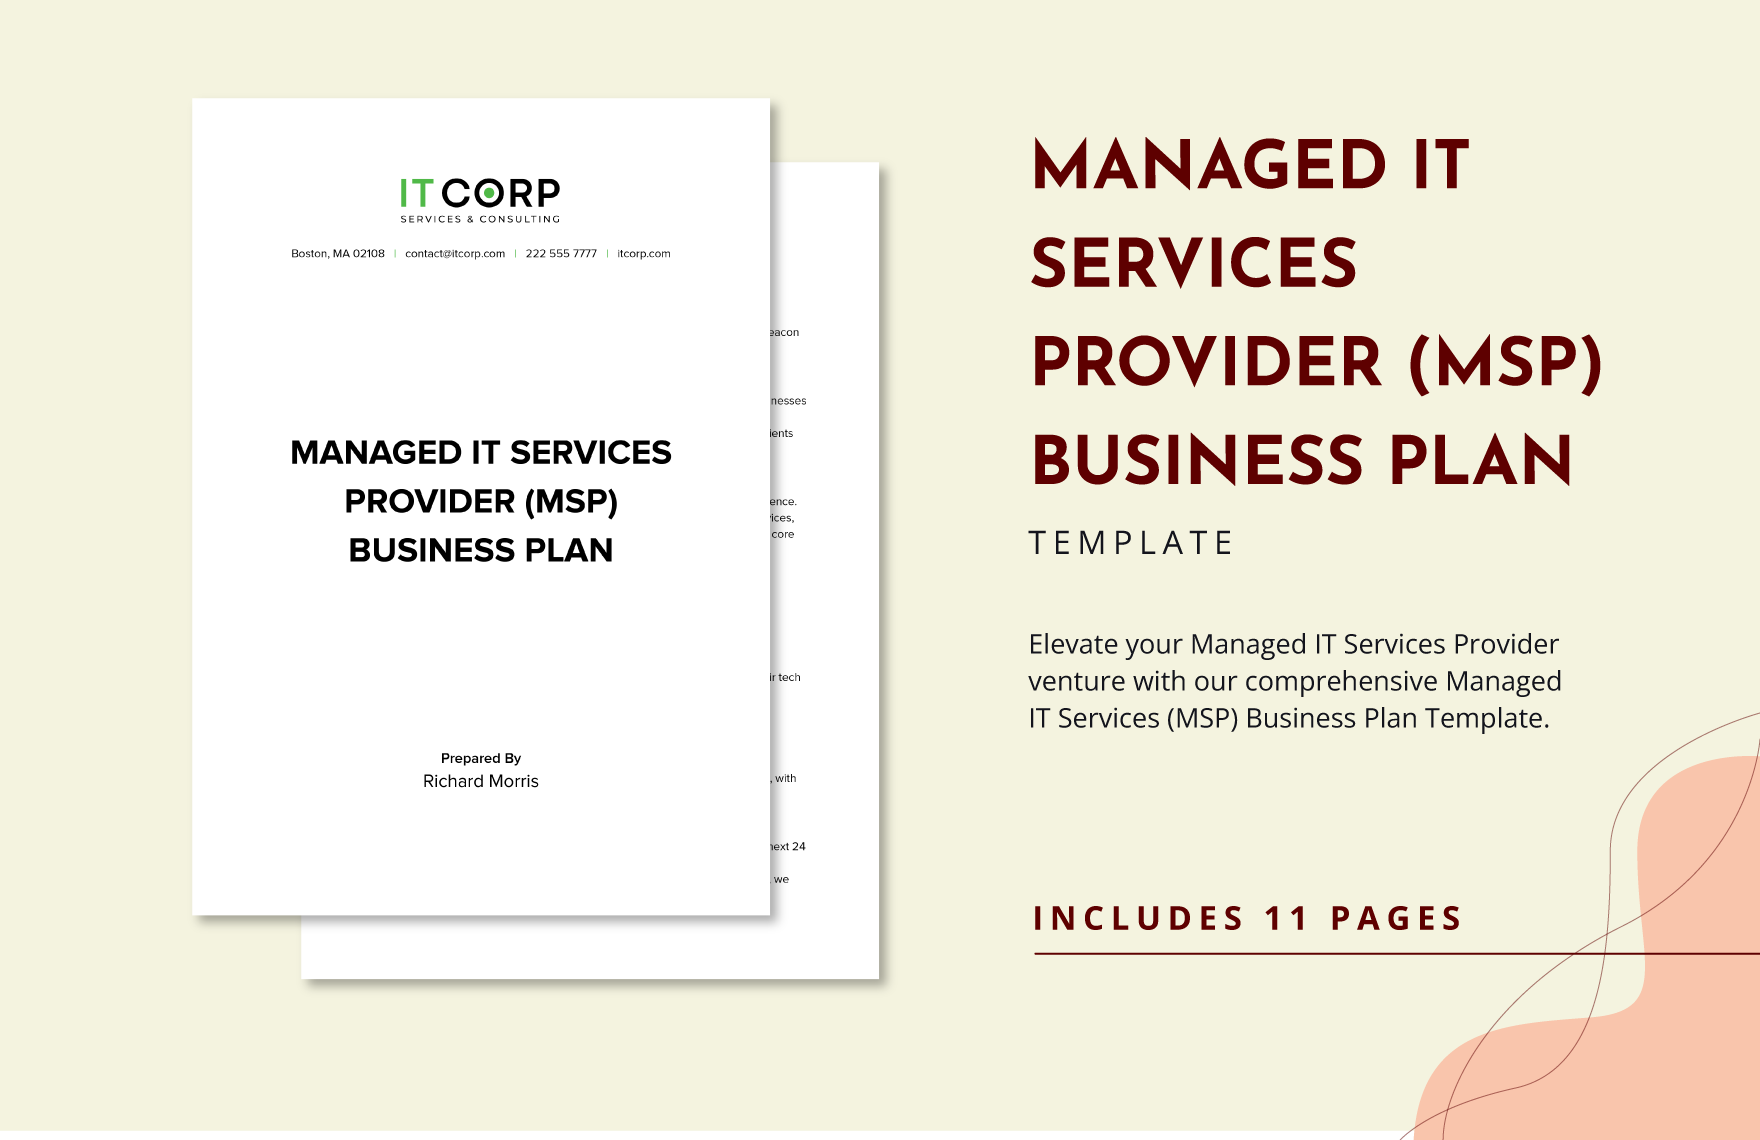 Managed IT Services Provider (MSP) Business Plan Template in Word, Google Docs, PDF